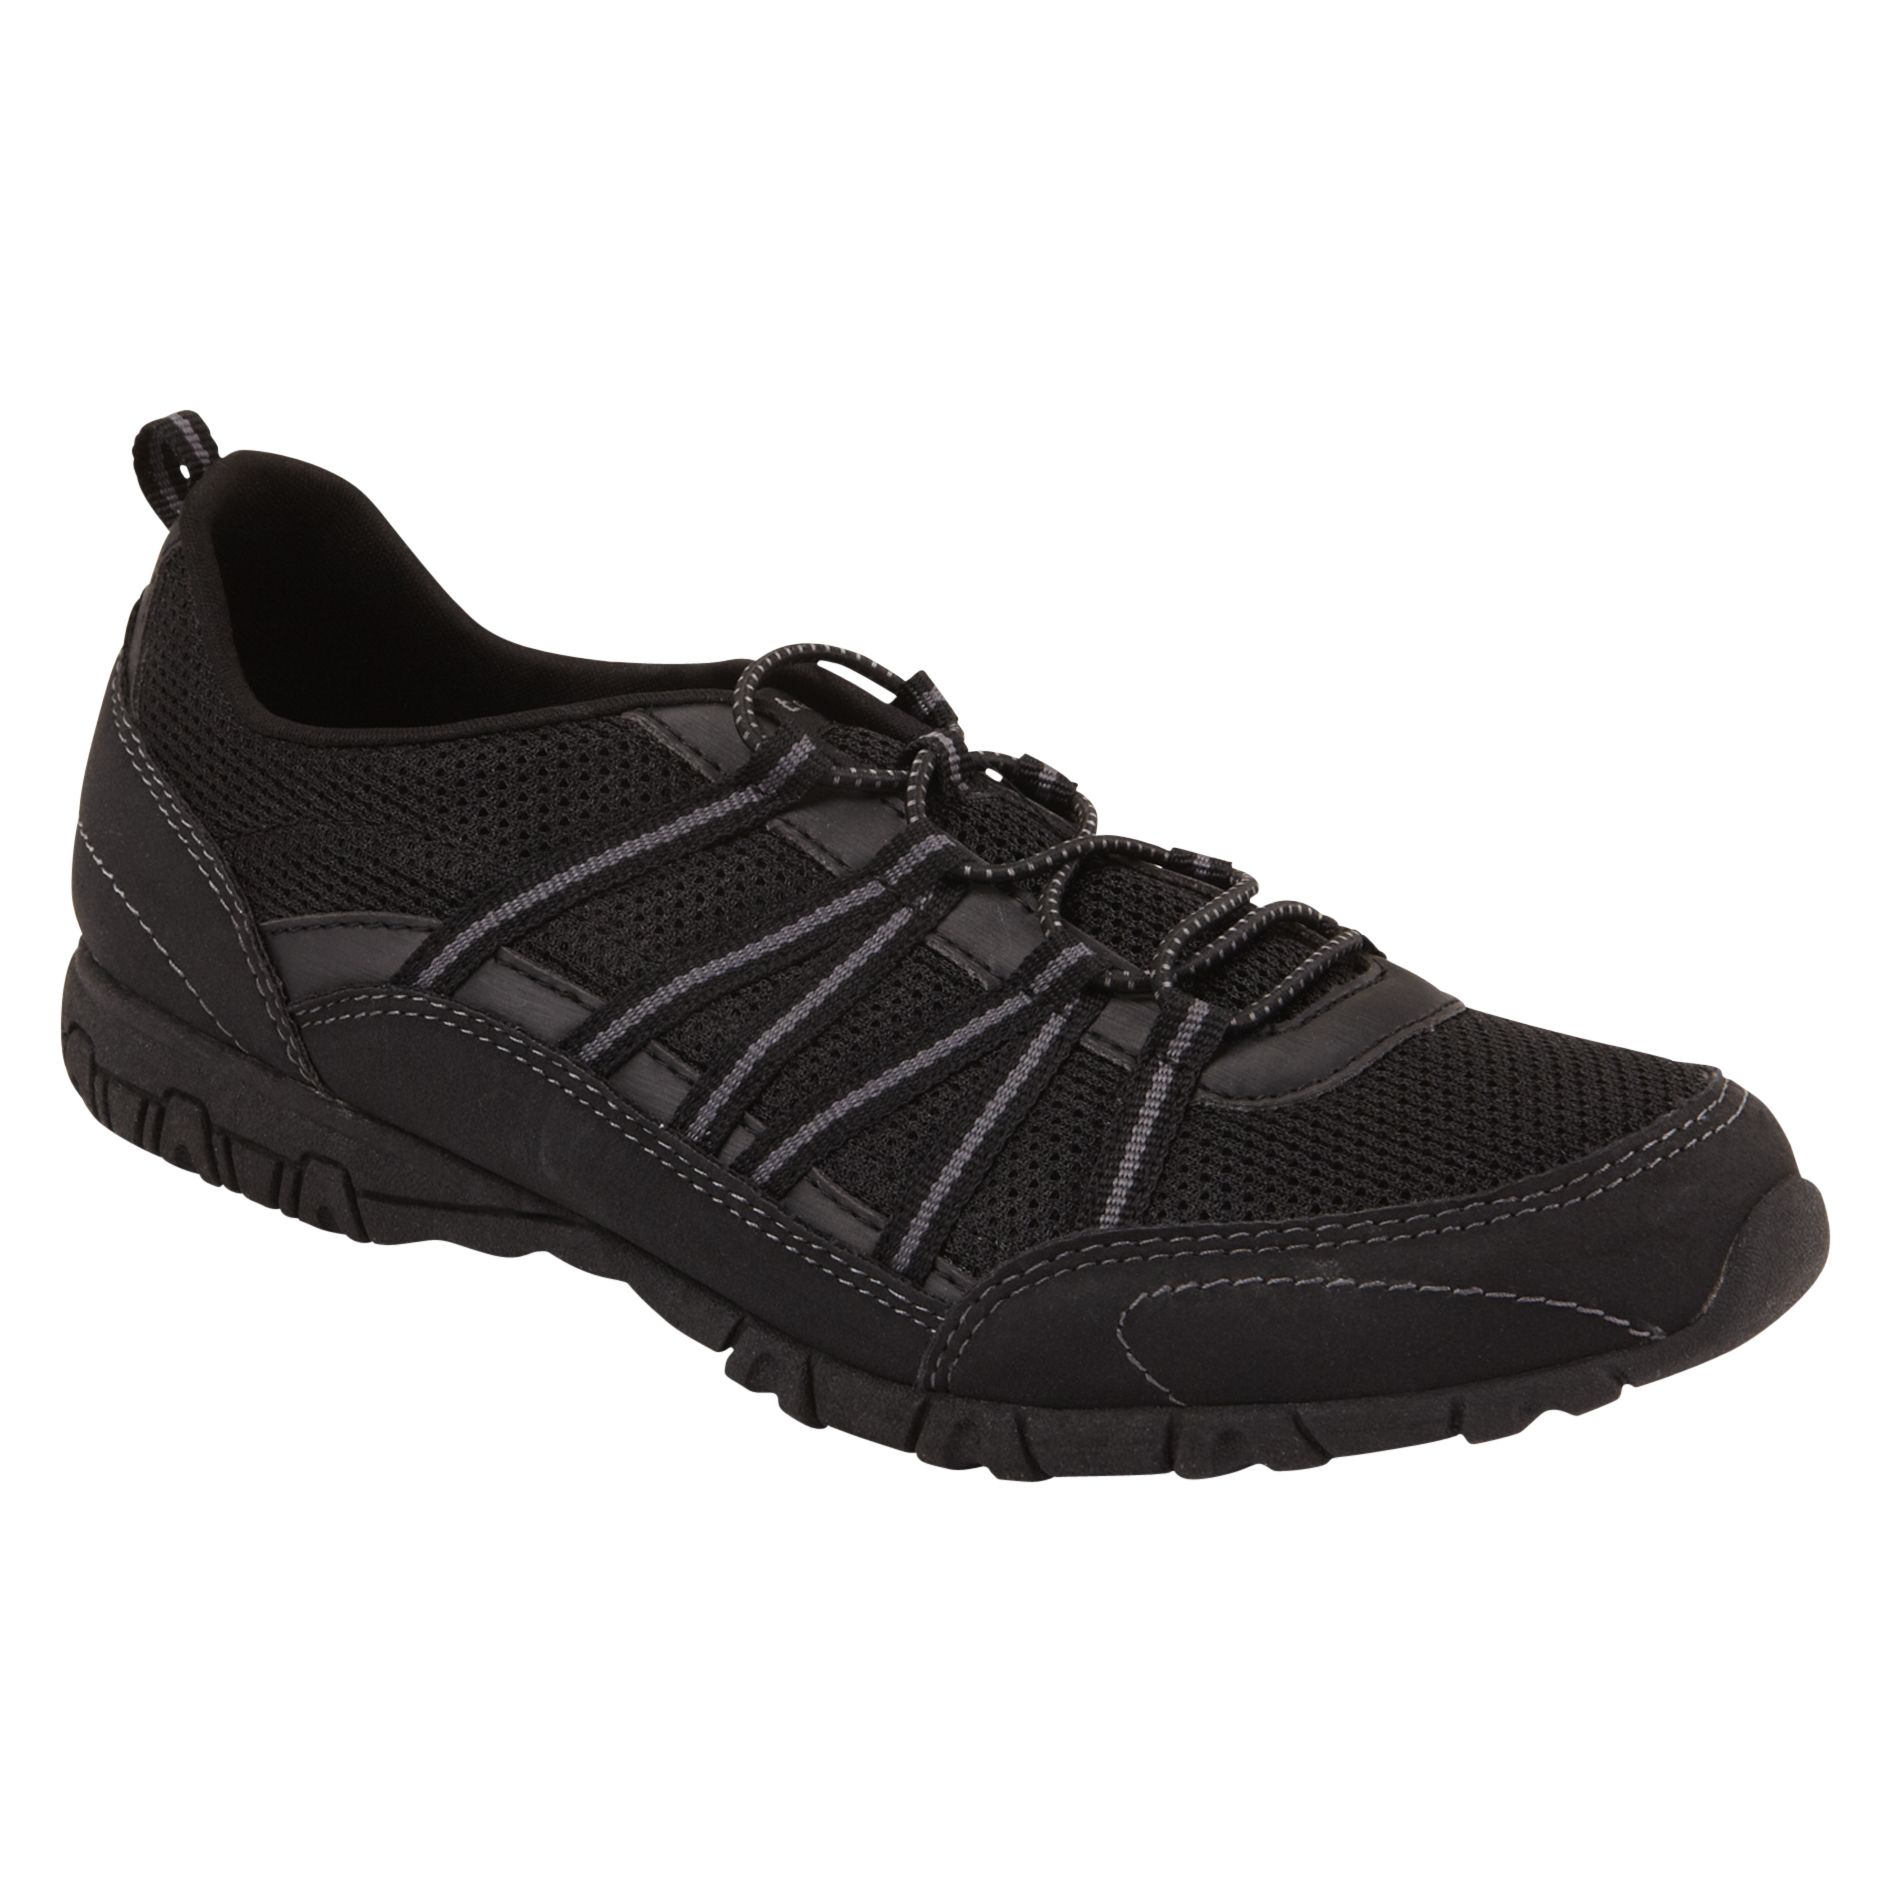 Bowling Shoes: Buy Bowling Shoes In Fitness & Sports at Kmart